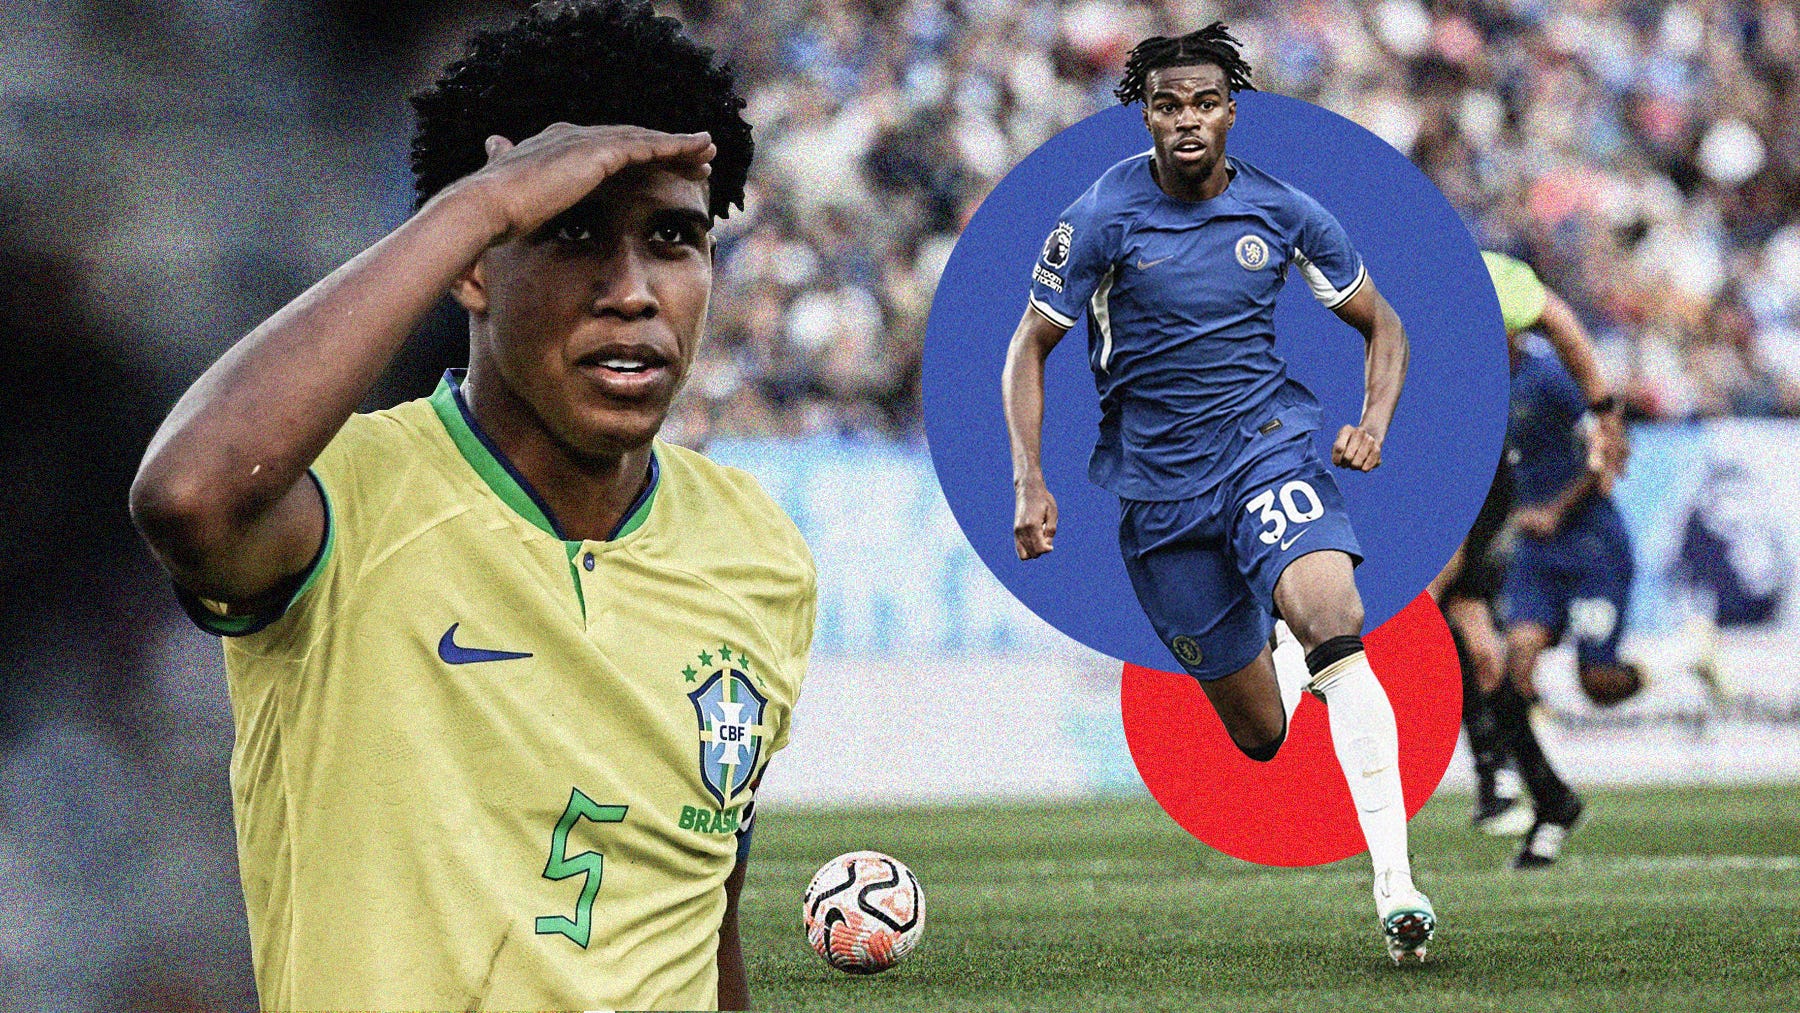 A composite image featuring two photos: on the left, Andrey Santos in a Brazil shirt with his hand on his brow looking toward something; on the right, Carney Chukwuemeka is carrying the ball while playing for Chelsea